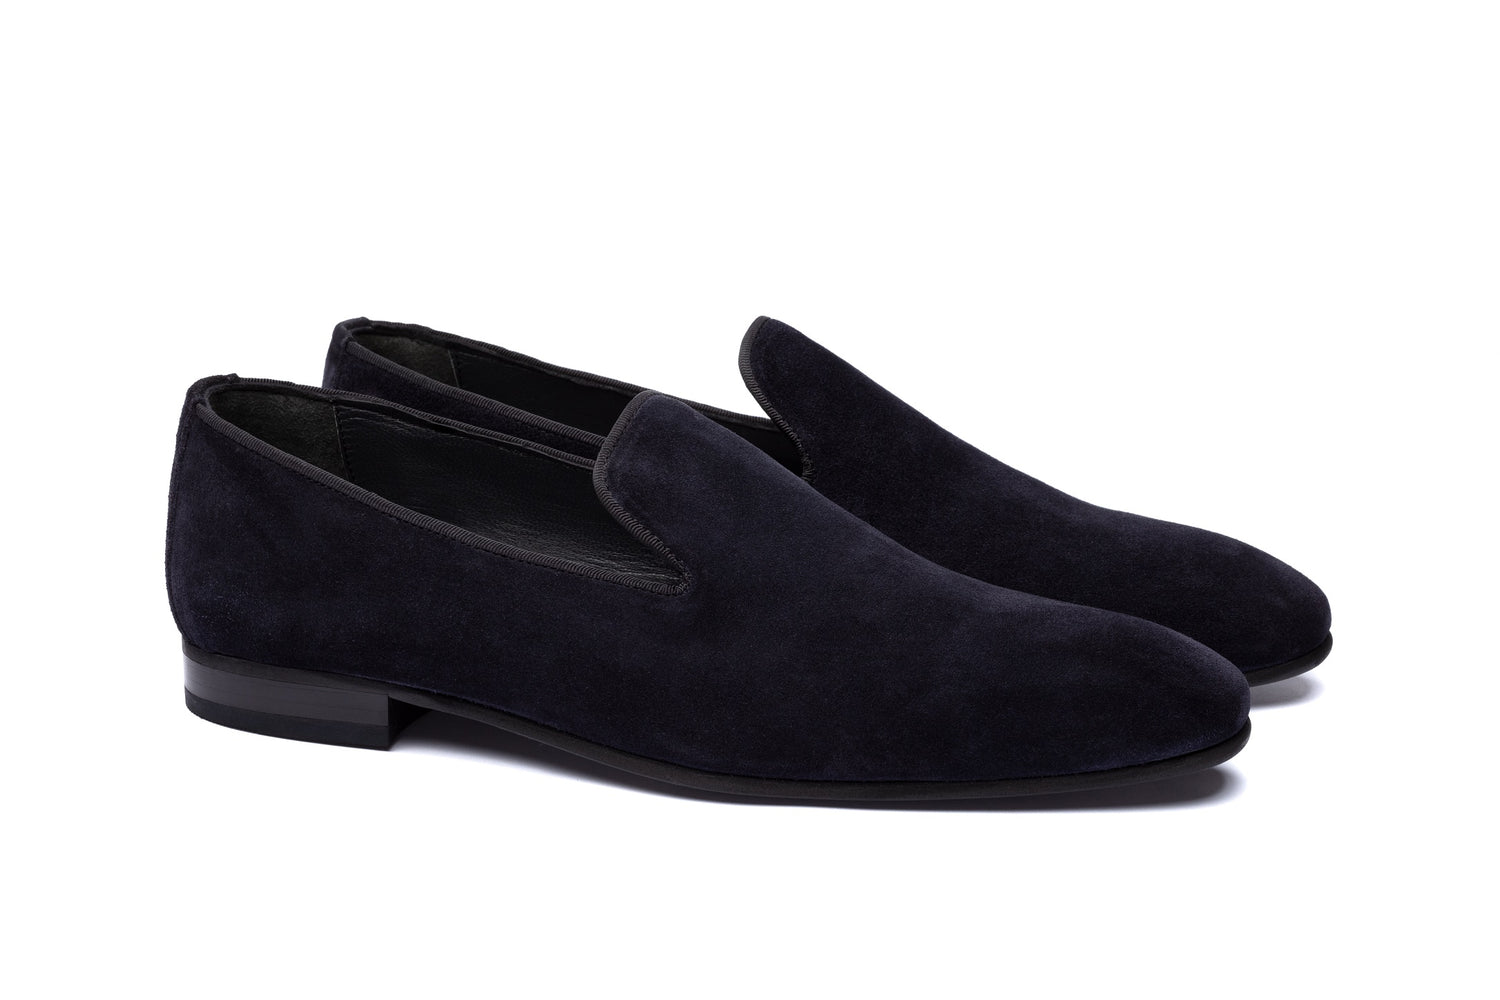 The Mikel Loafers - Loafers by Urbbana